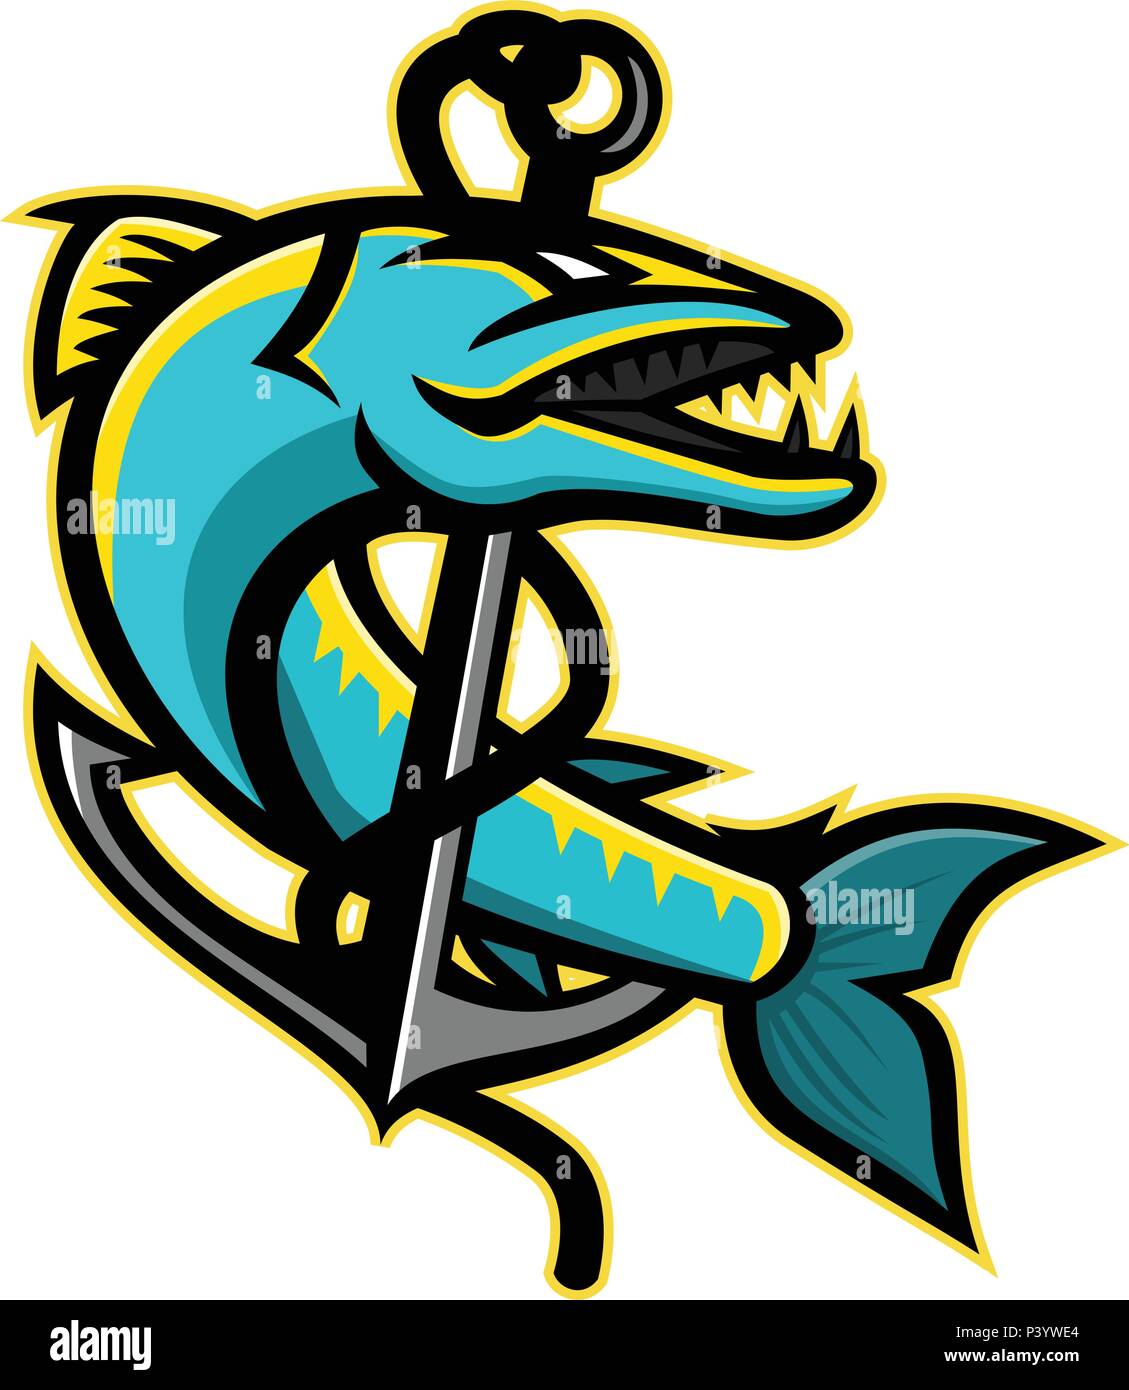 Mascot icon illustration of a great barracuda, a saltwater fish that is snake-like with fearsome appearance and ferocious behaviour, coiling up an anc Stock Vector